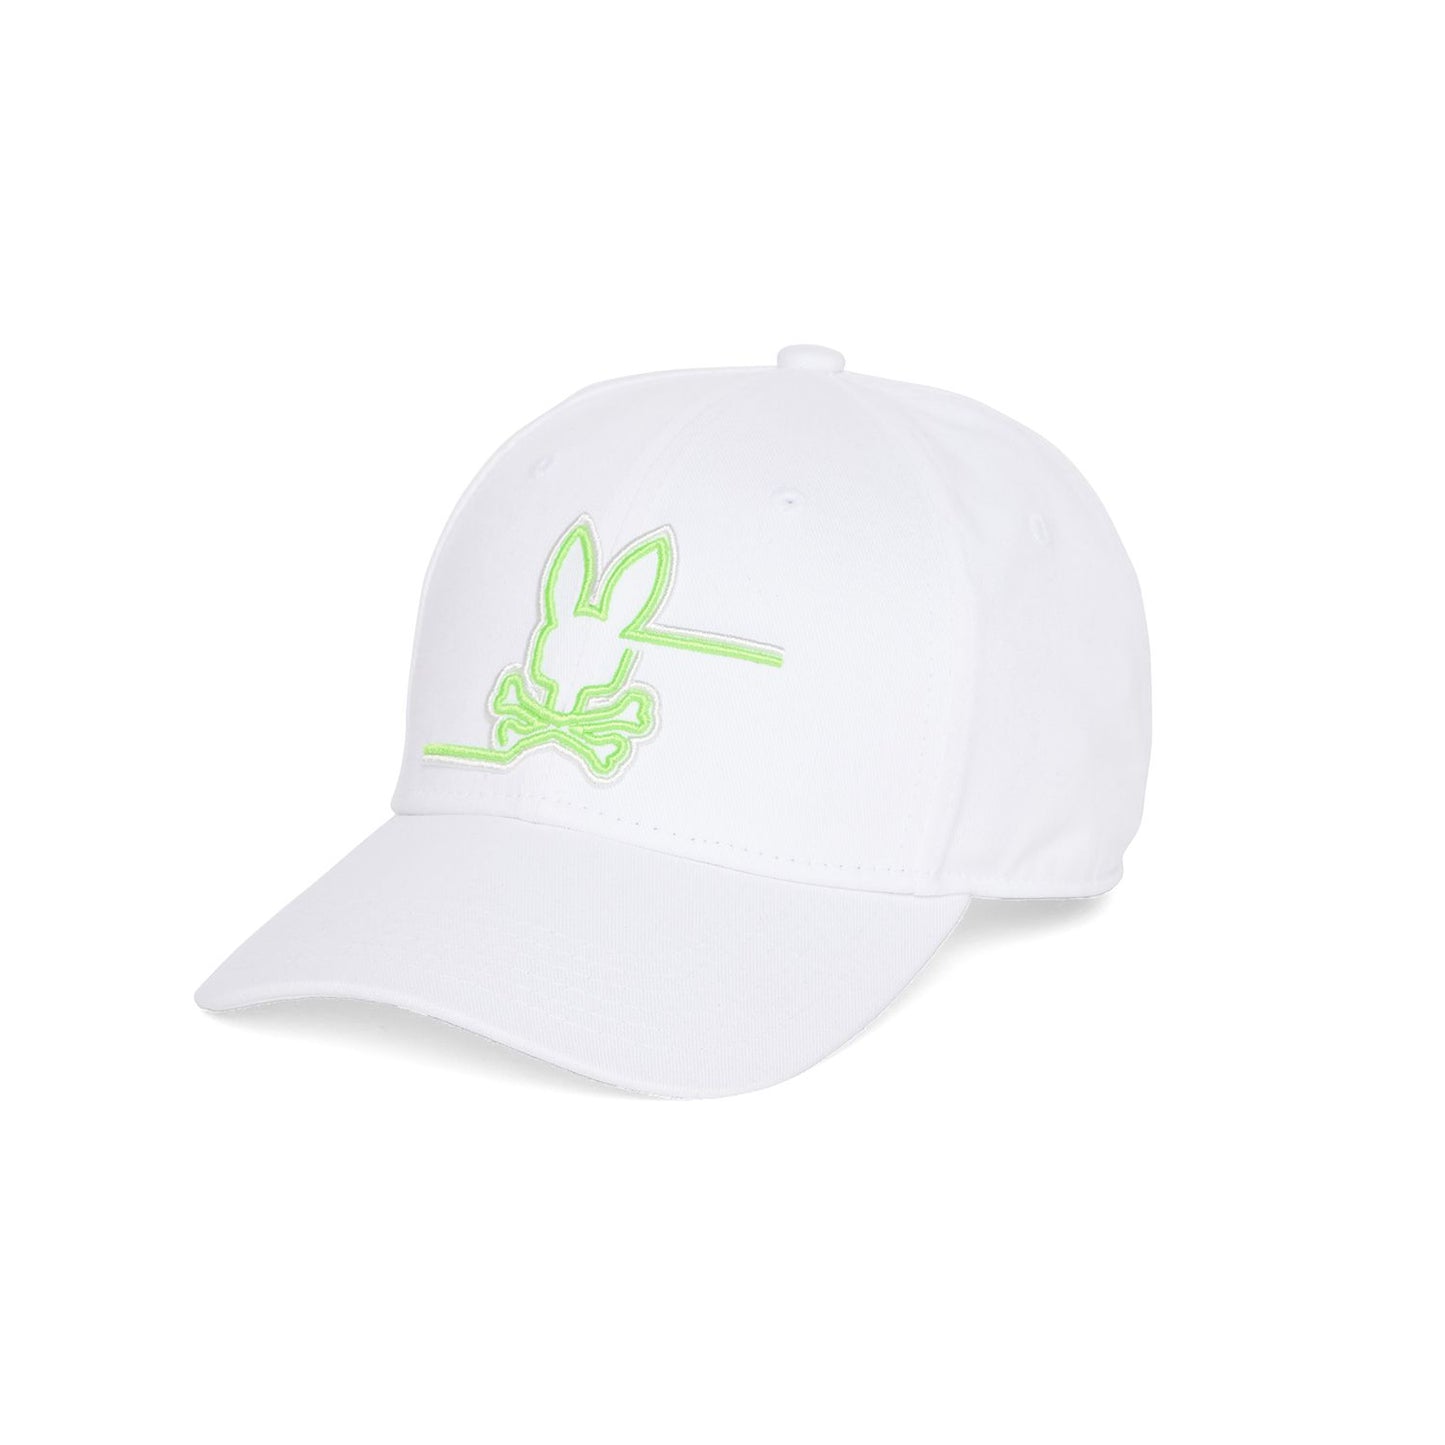 Chester Embroidered Baseball Cap White - Psycho Bunny